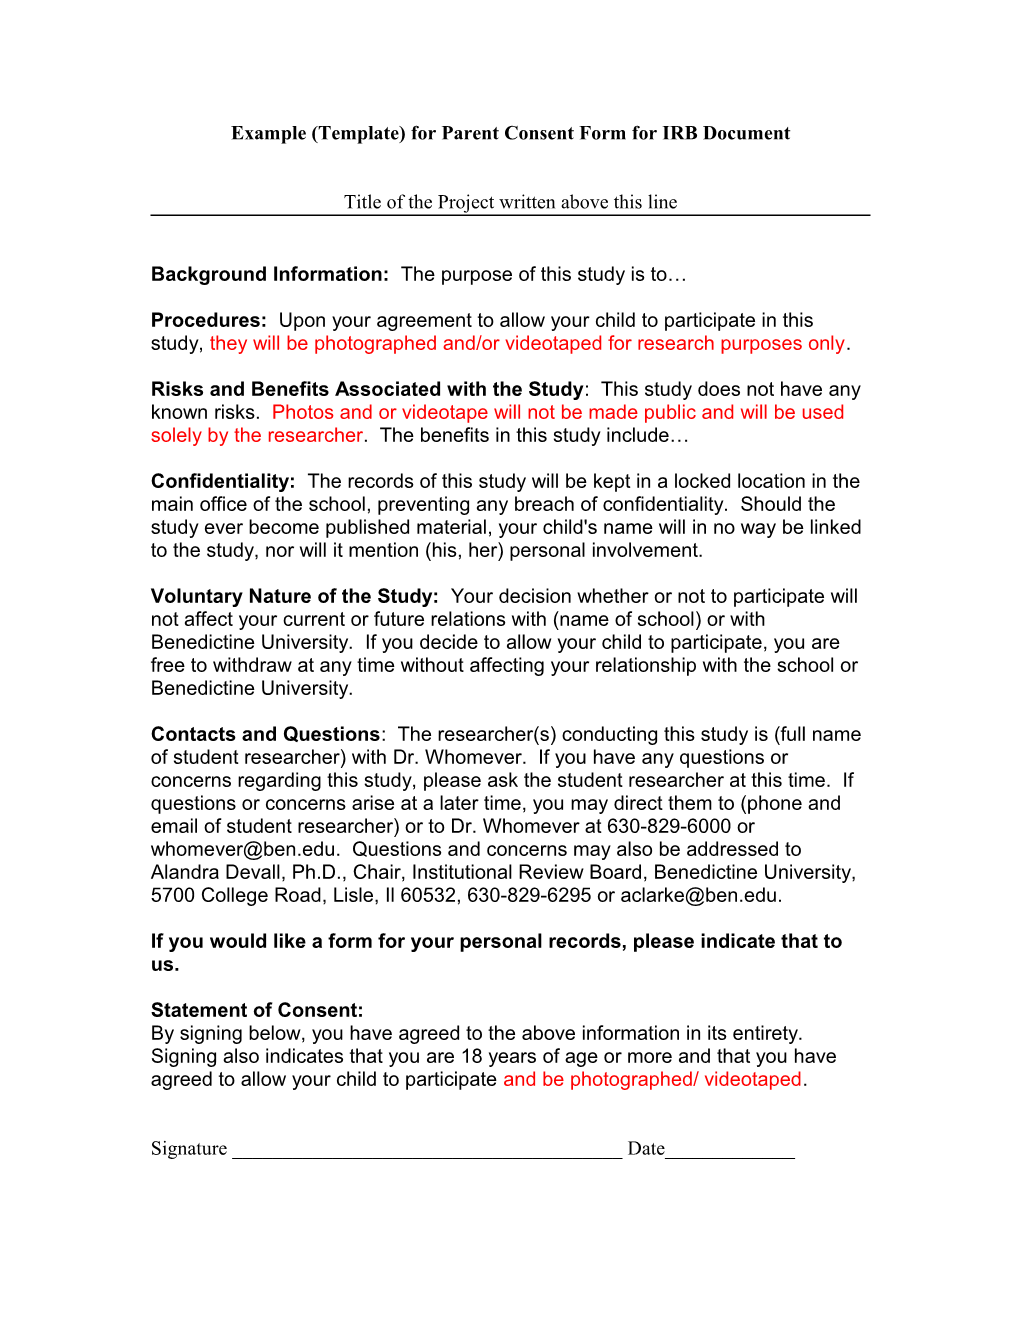 Example (Template) for Parent Consent Form for IRB Document